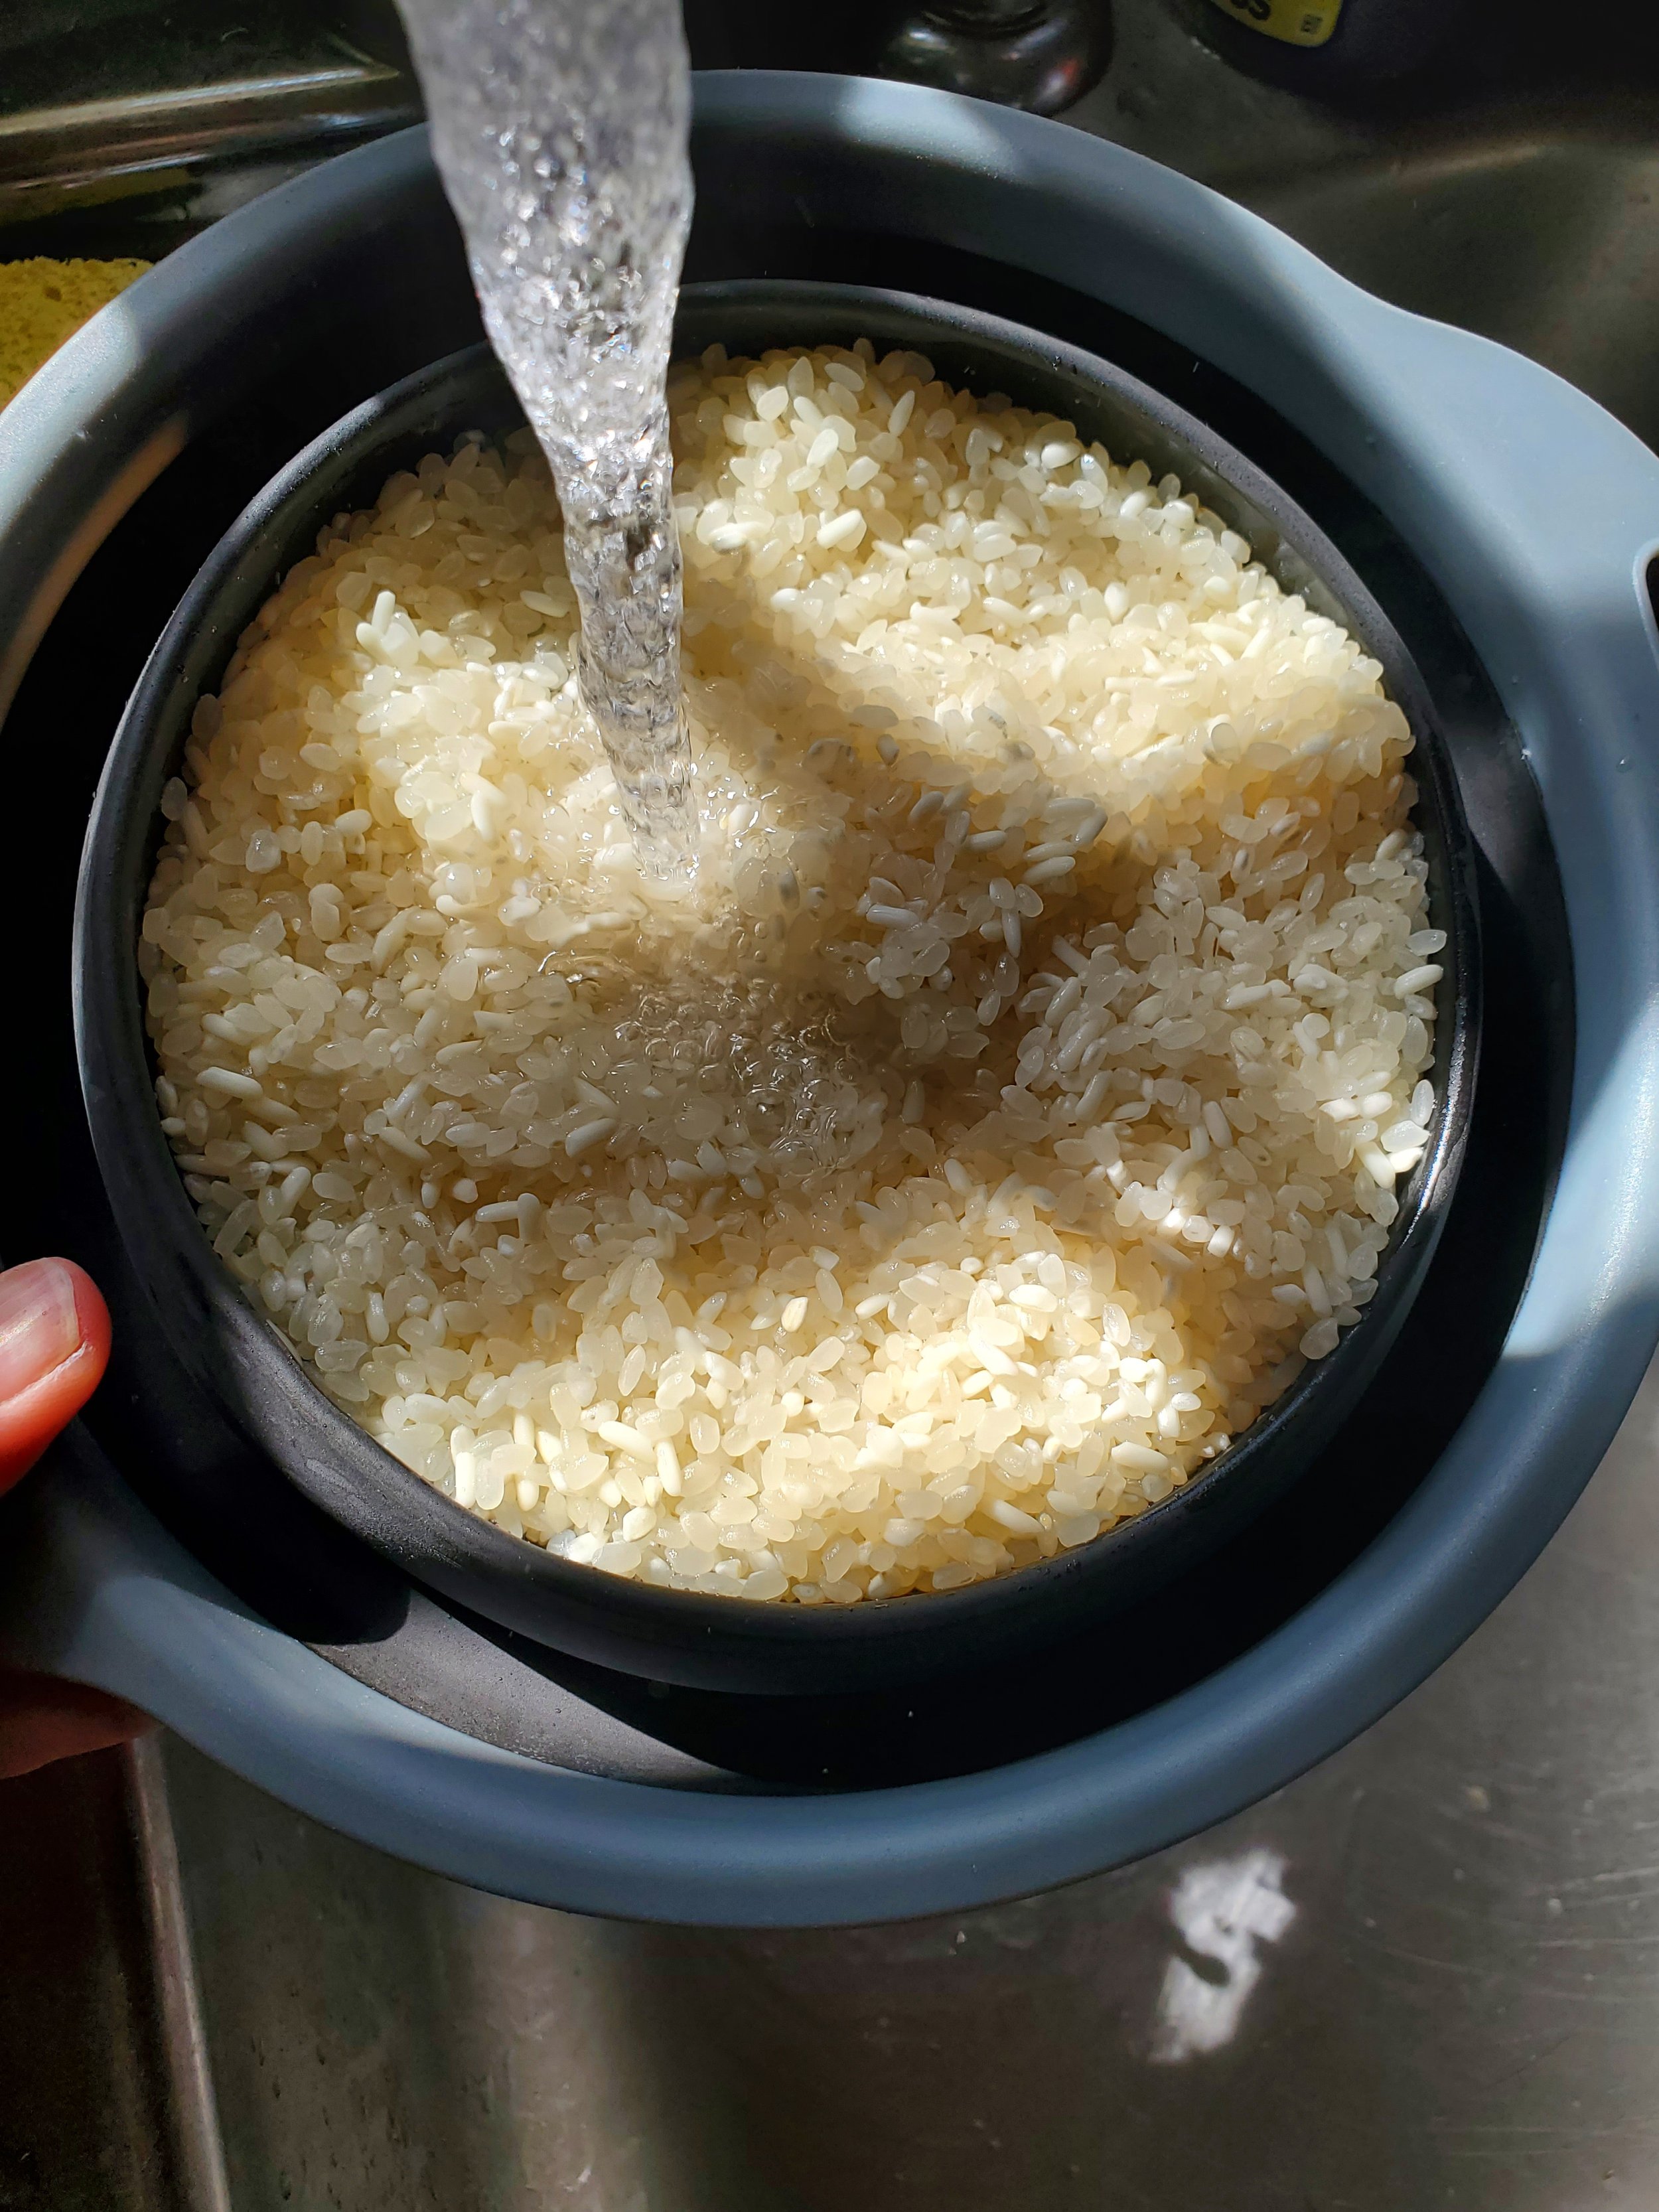 You need to rinse your rice before you cook it, to make it fluffy and sticky